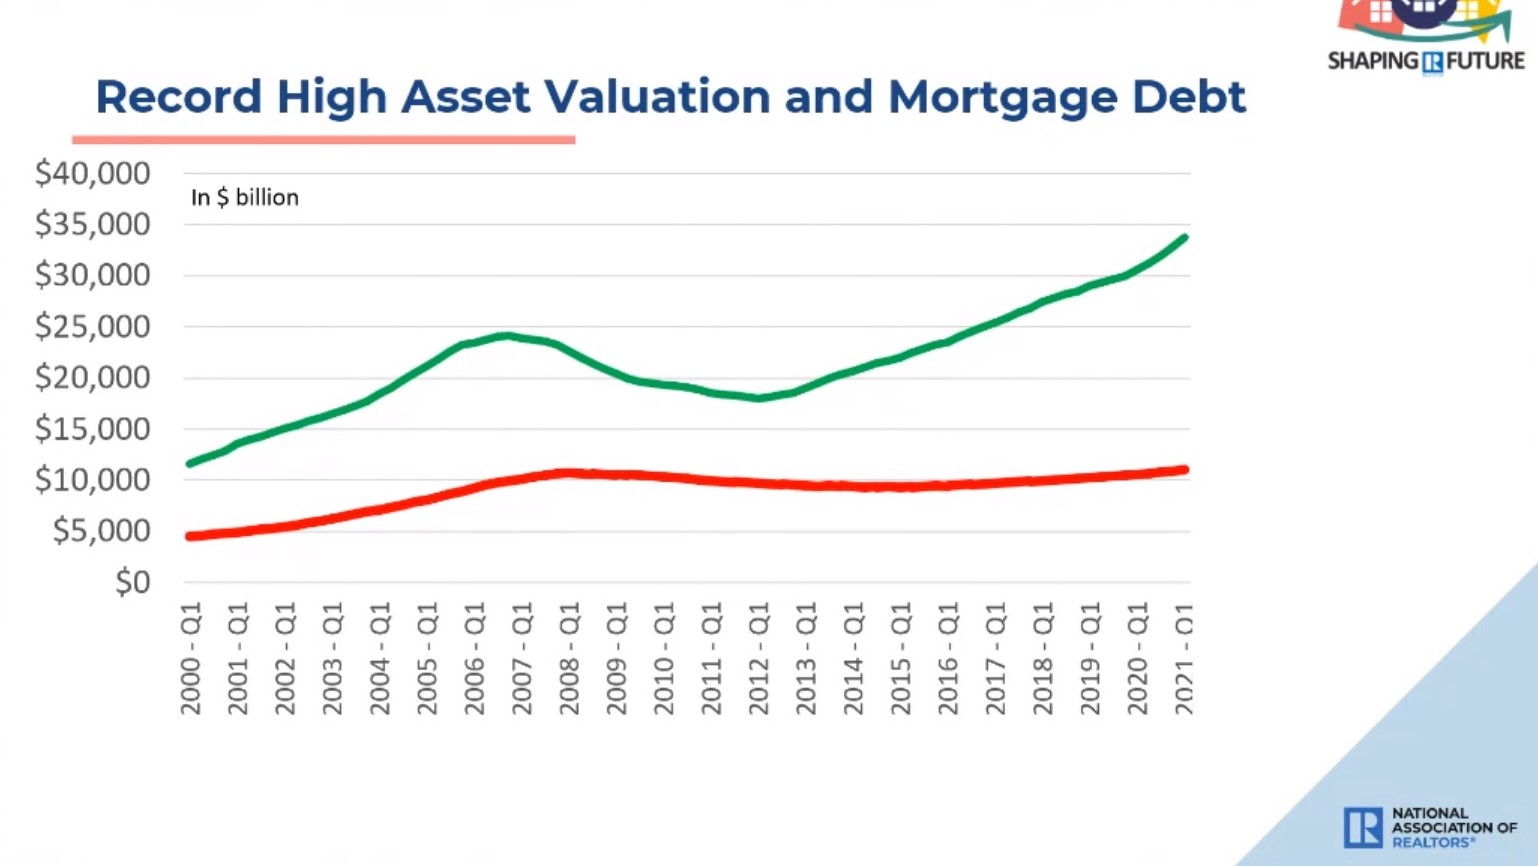 Record High Asset Valuation and Mortgage Debt